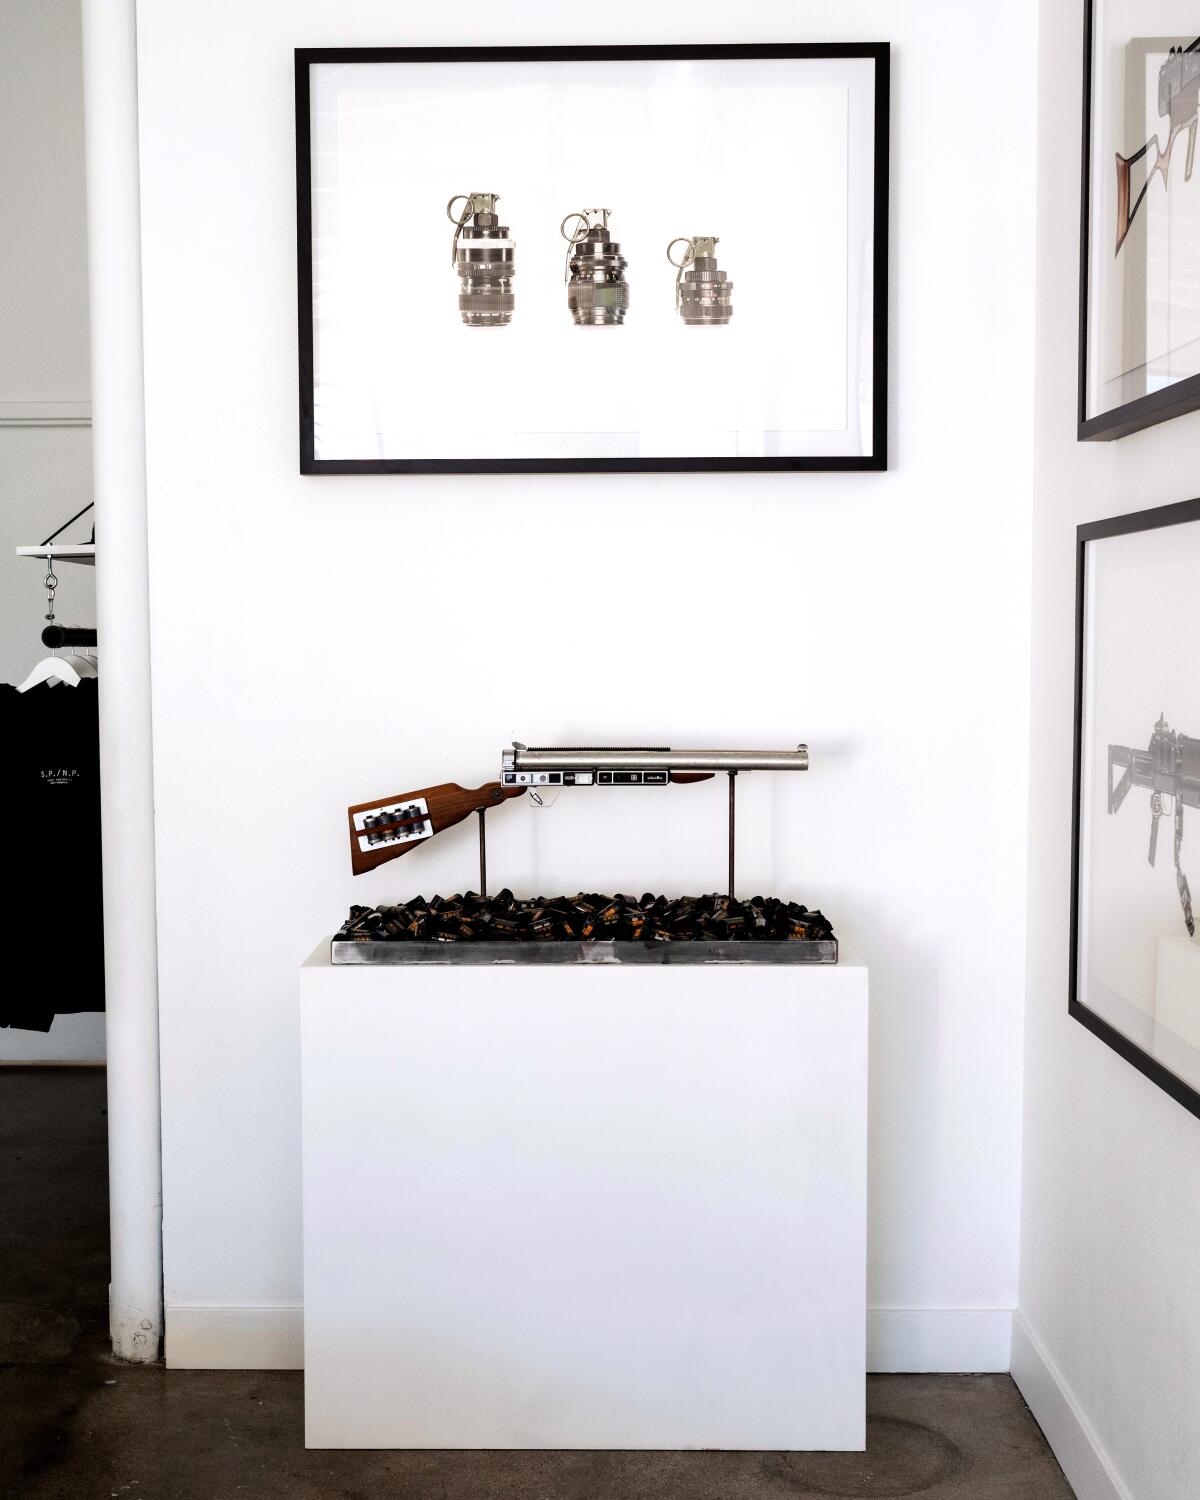 A gallery space with an art sculpture of a gun on a pedestal with a picture of grenades on the wall.